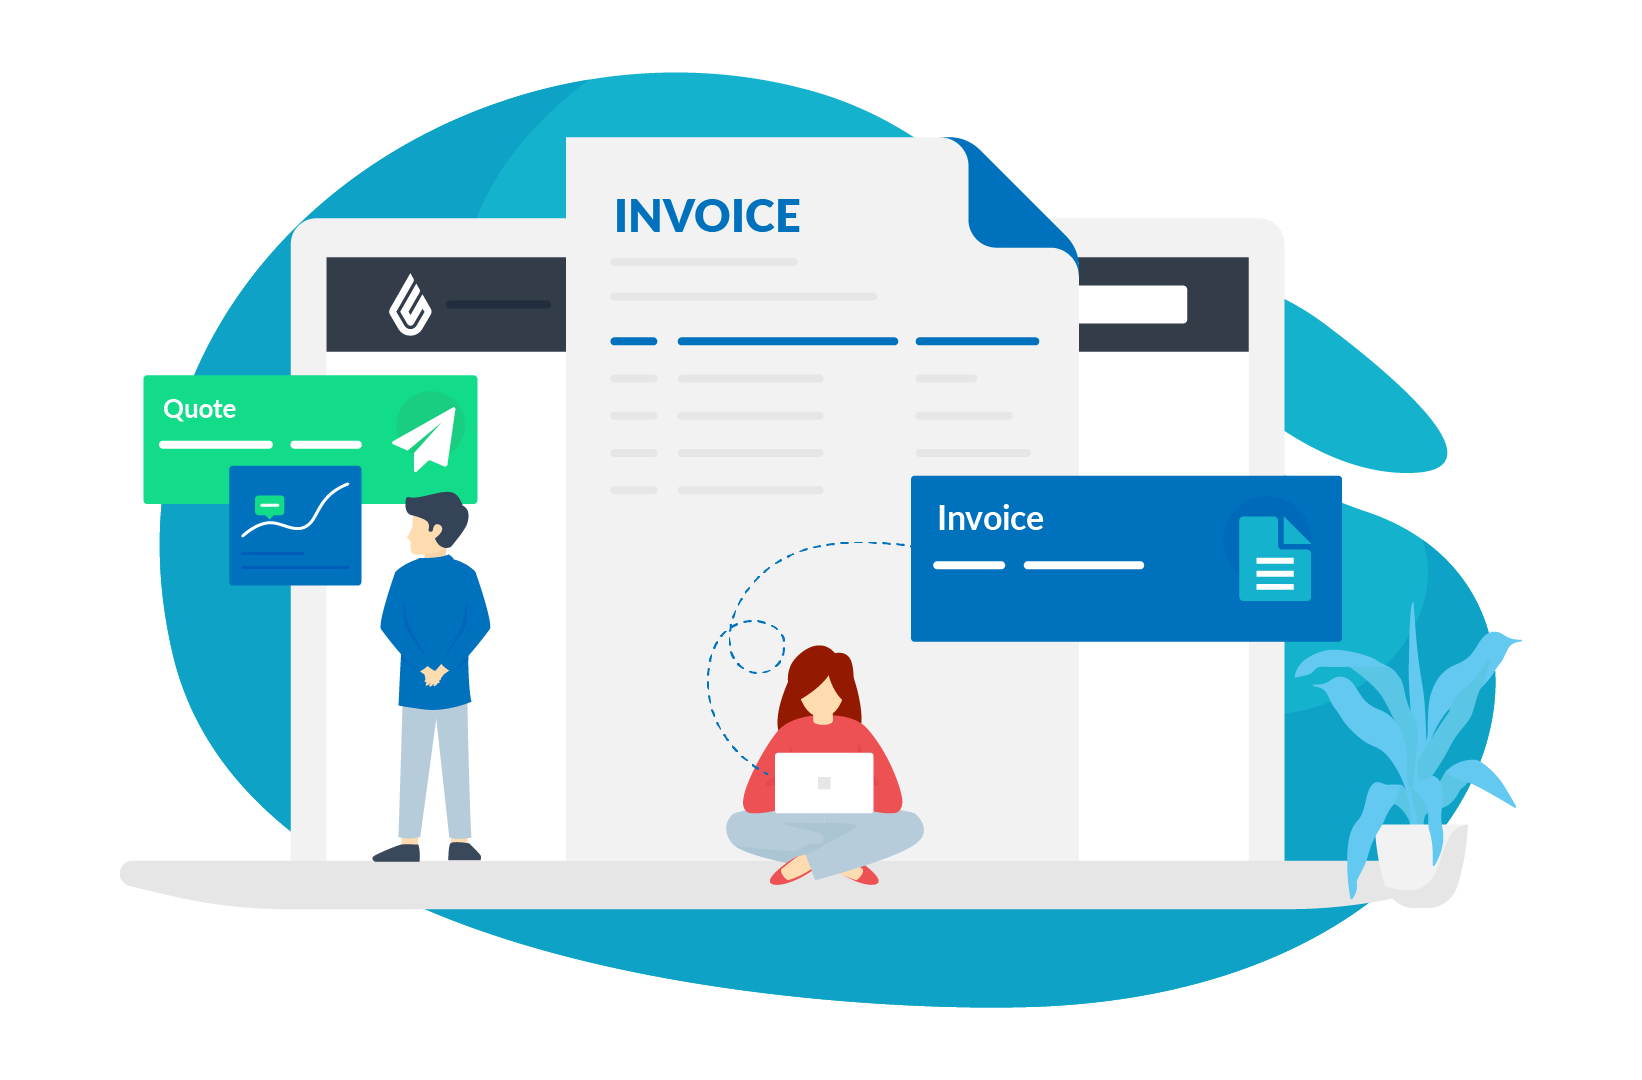 Invoicing for Lightspeed Retail